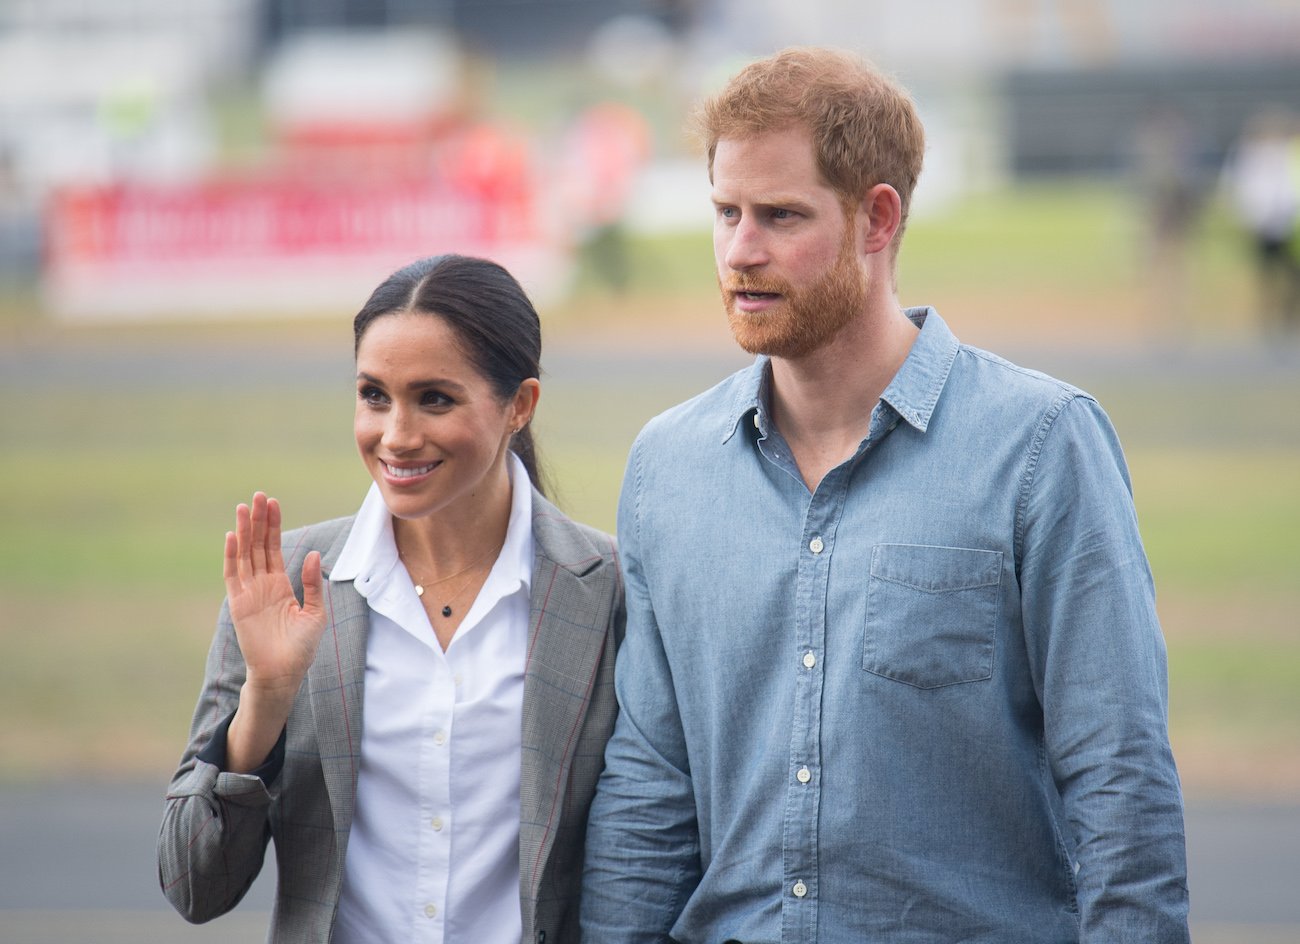 Meghan Markle waving while walking next to Prince Harry